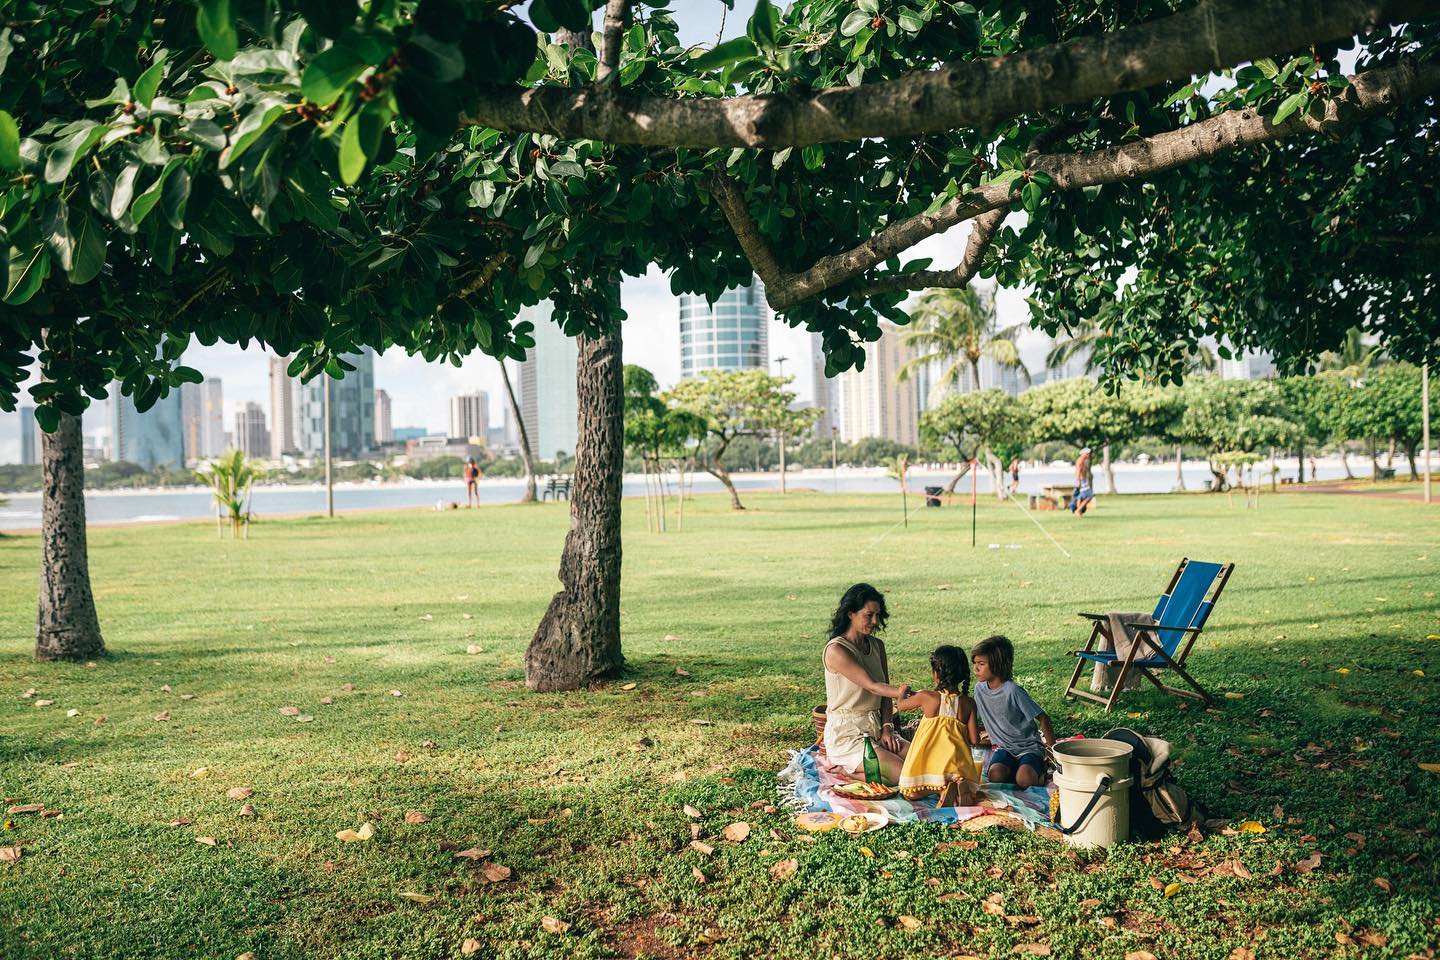 Adjacent to Victoria Ward Park and just minutes from Ala Moana Beach Park and Kewalo Basin, The Park Ward Village is surrounded by nature. Its location means you can more easily find your sanctuary in these beautiful places that restore balance to city living.